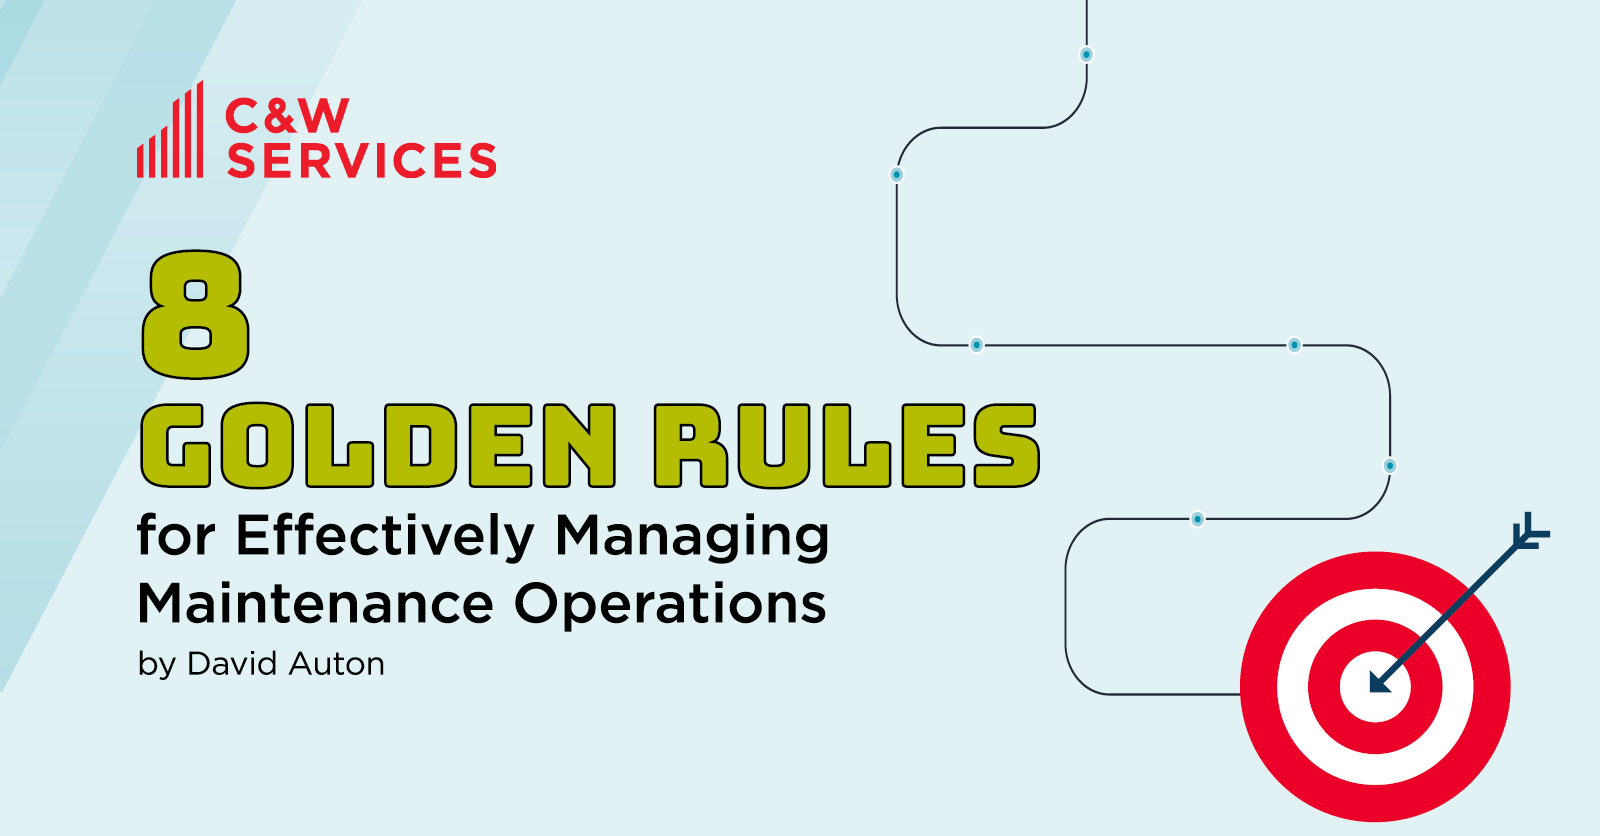 8 golden rules for effectively managing maintenance operations.